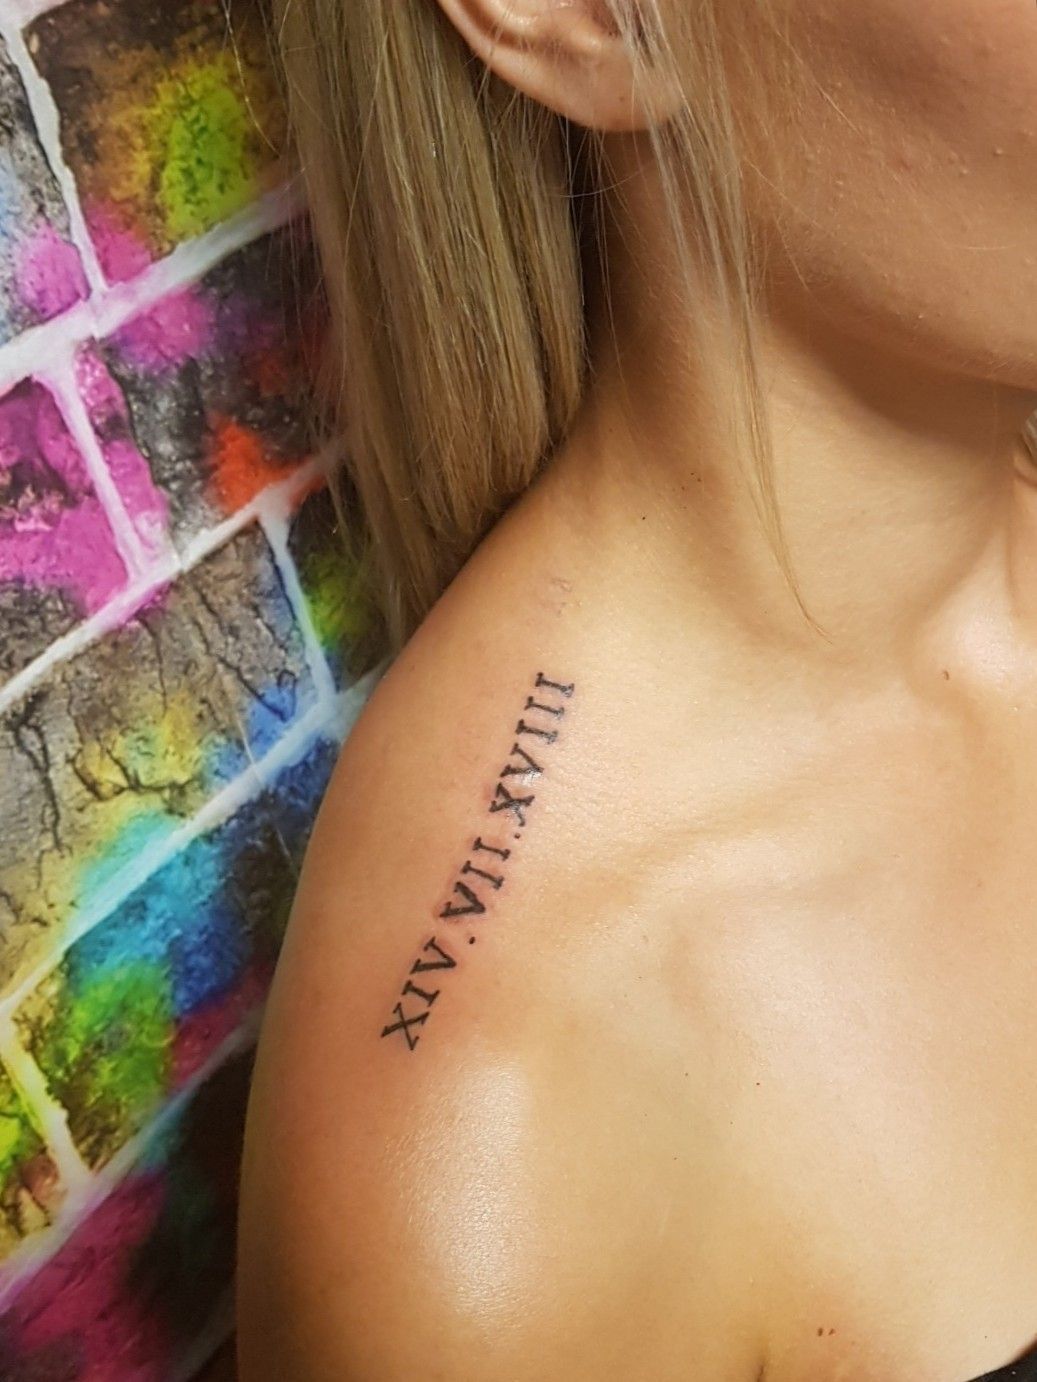 TwoTone Tattoo Company  Roman numerals of their wedding date by Lucy   Facebook